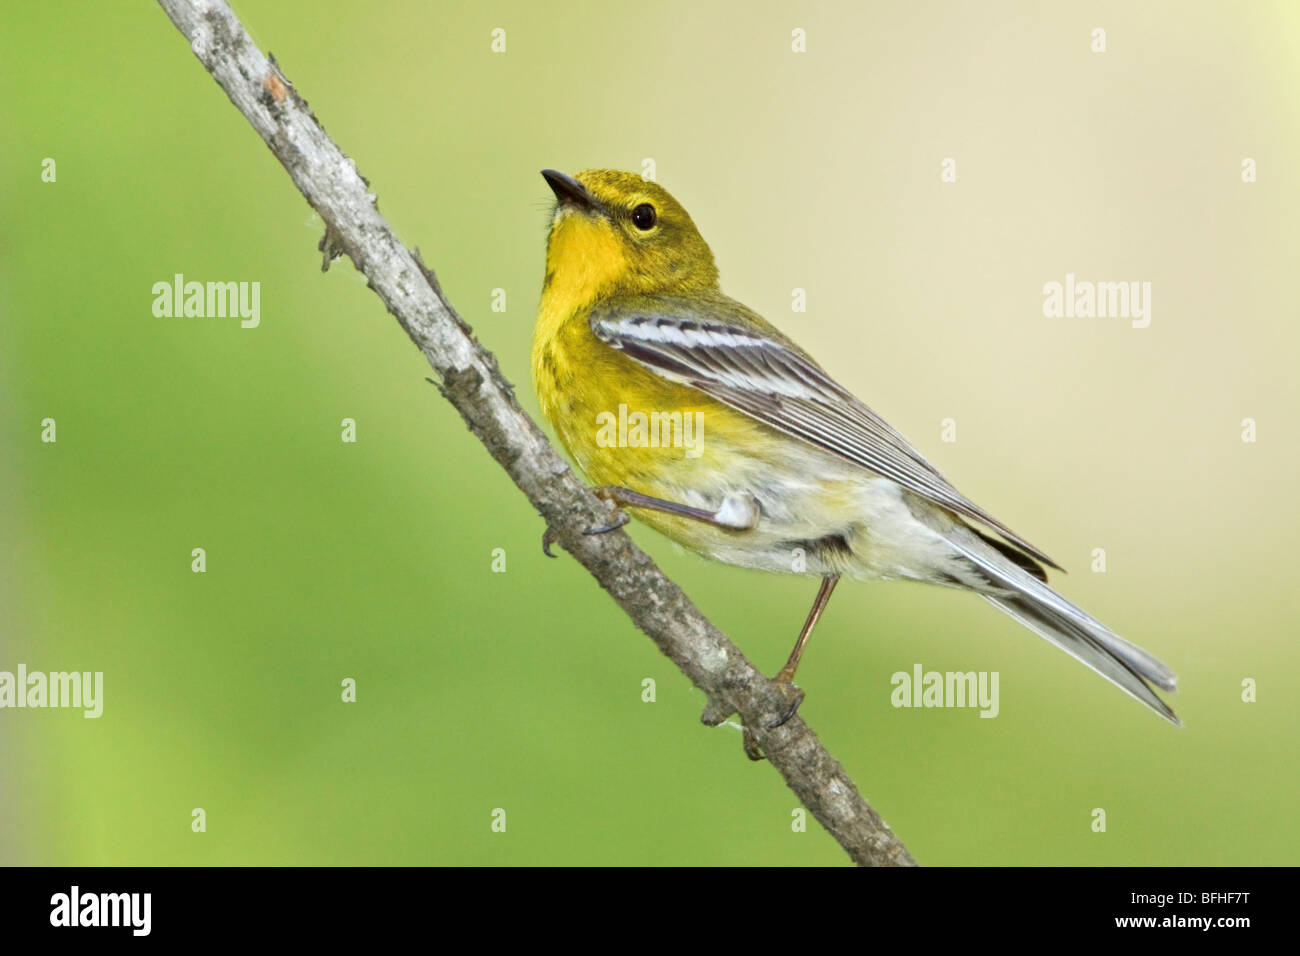 Pine Warbler (Dendroica pinus) perched on a branch near Huntsville, Ontario Canada. Stock Photo